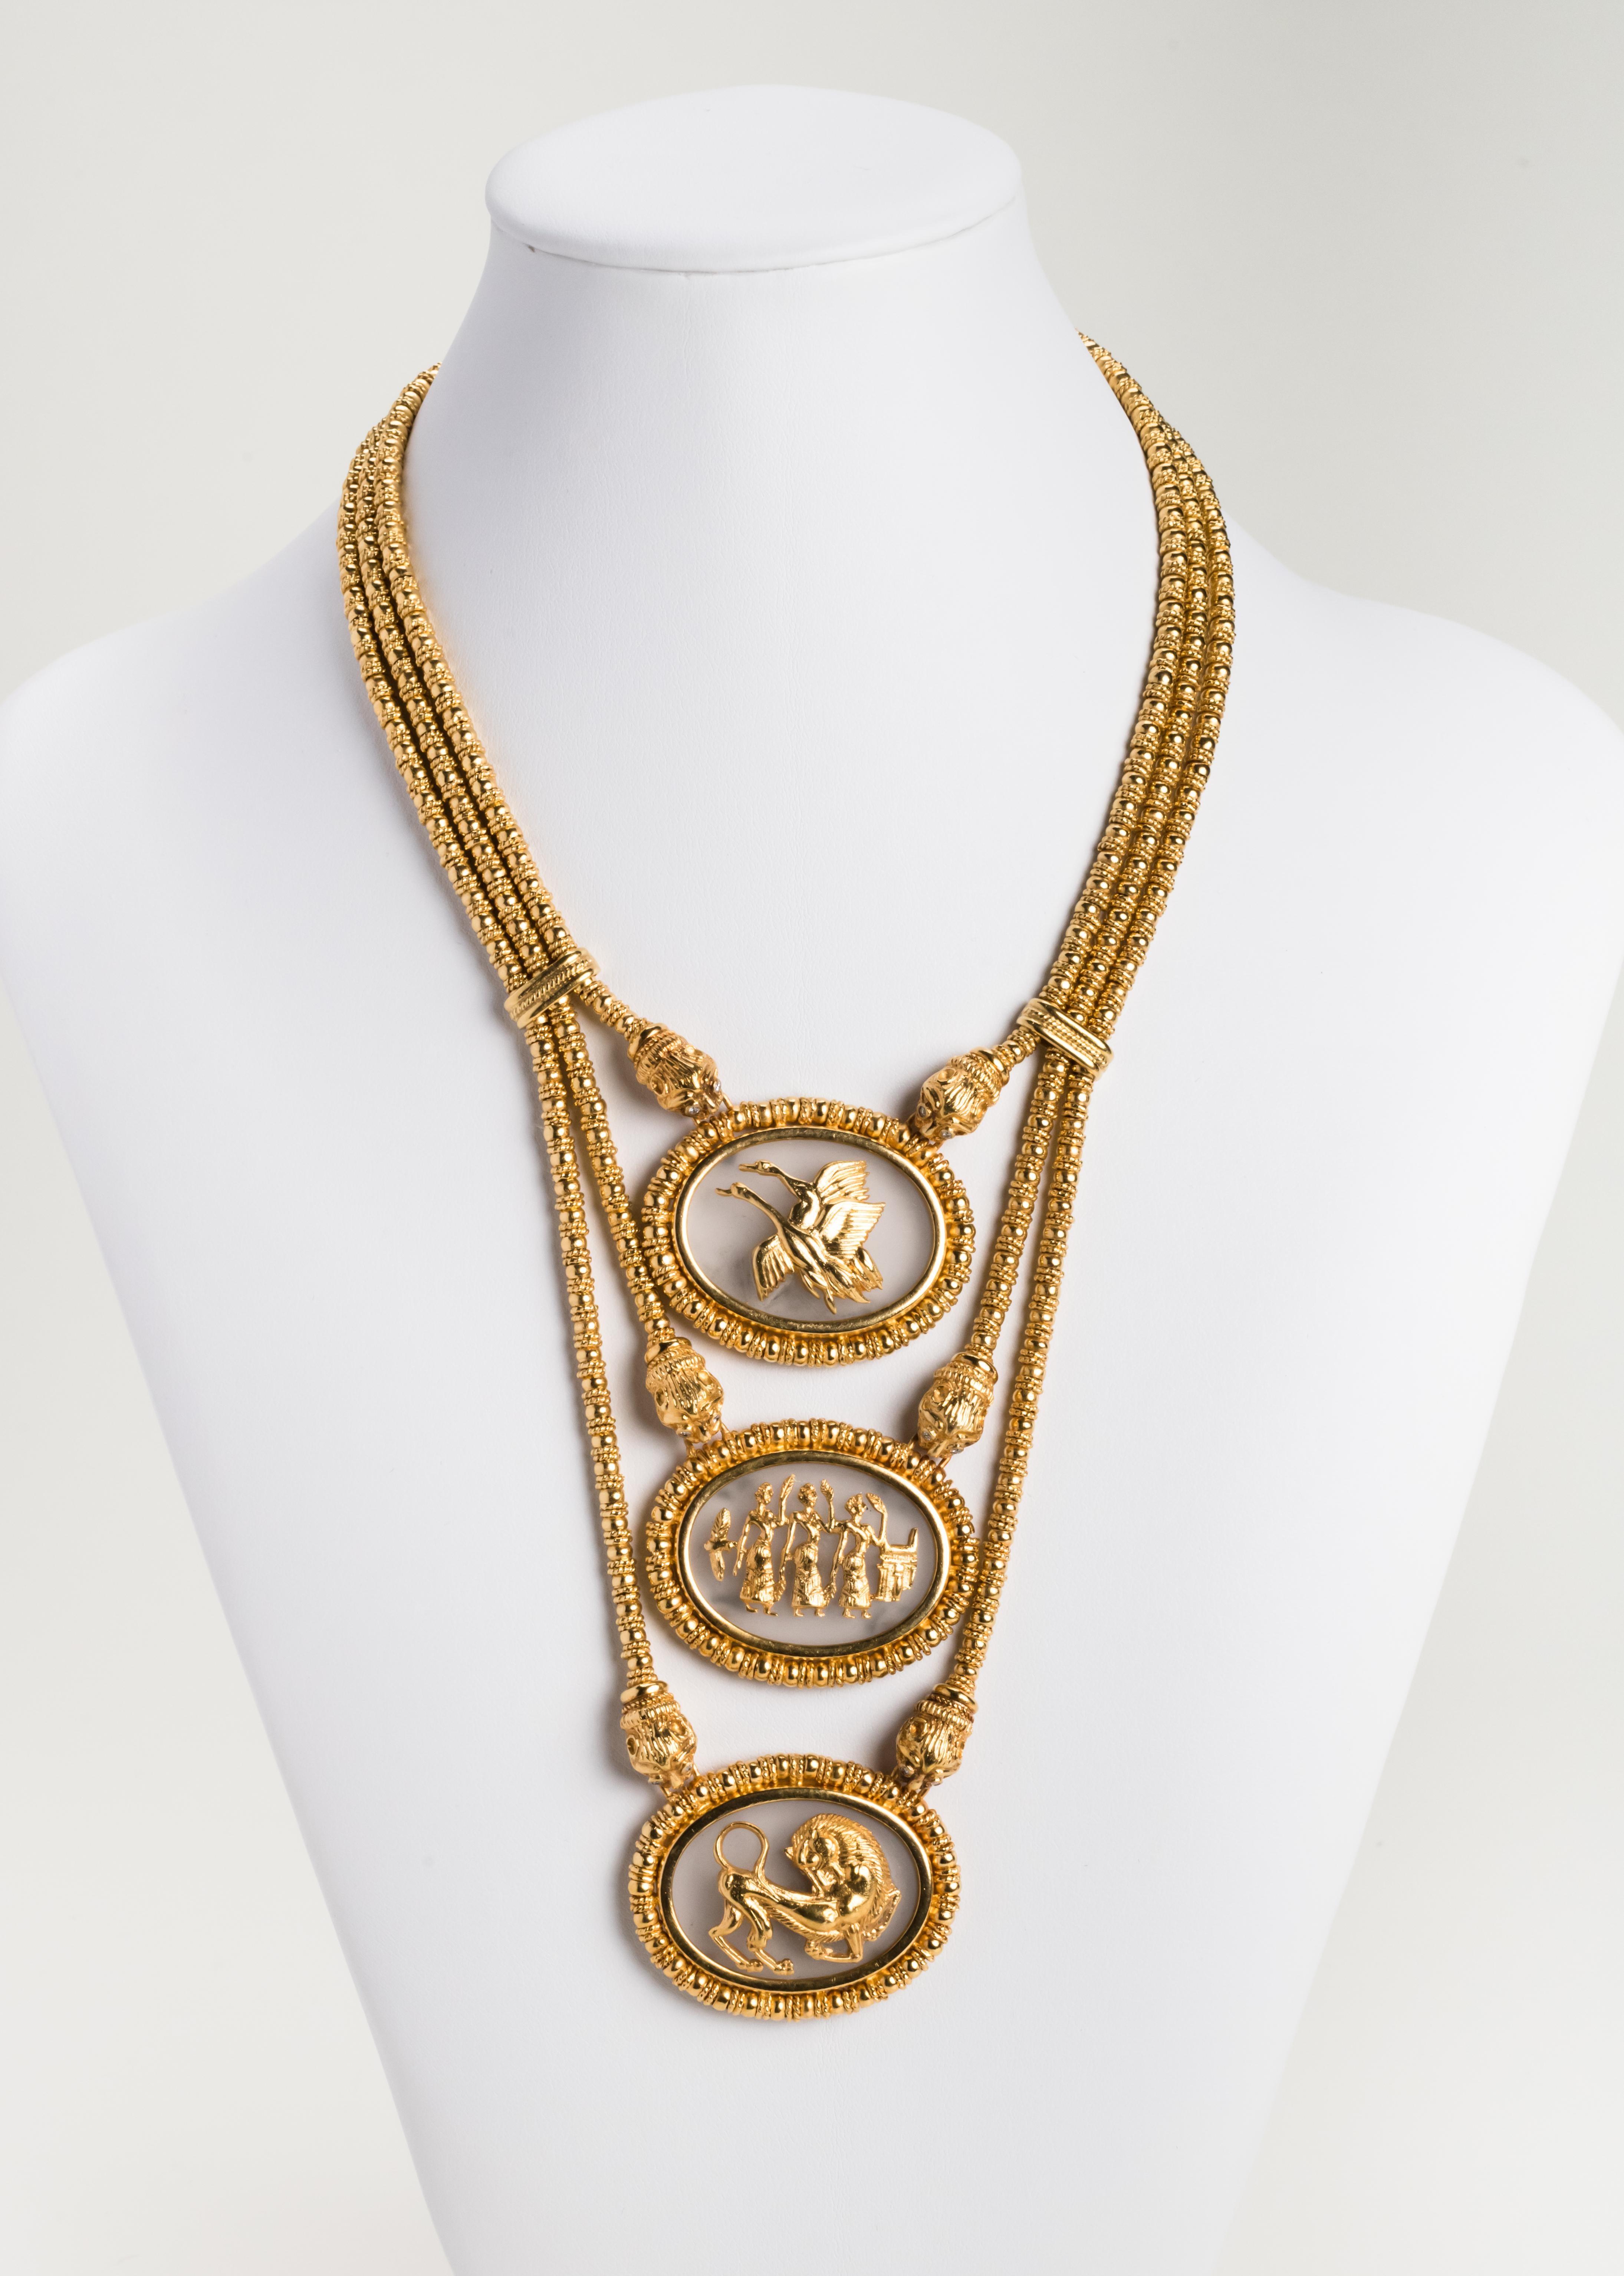 Ilias Lalaounis Triple Stranded Necklace with Three Medallions and Earrings For Sale 3